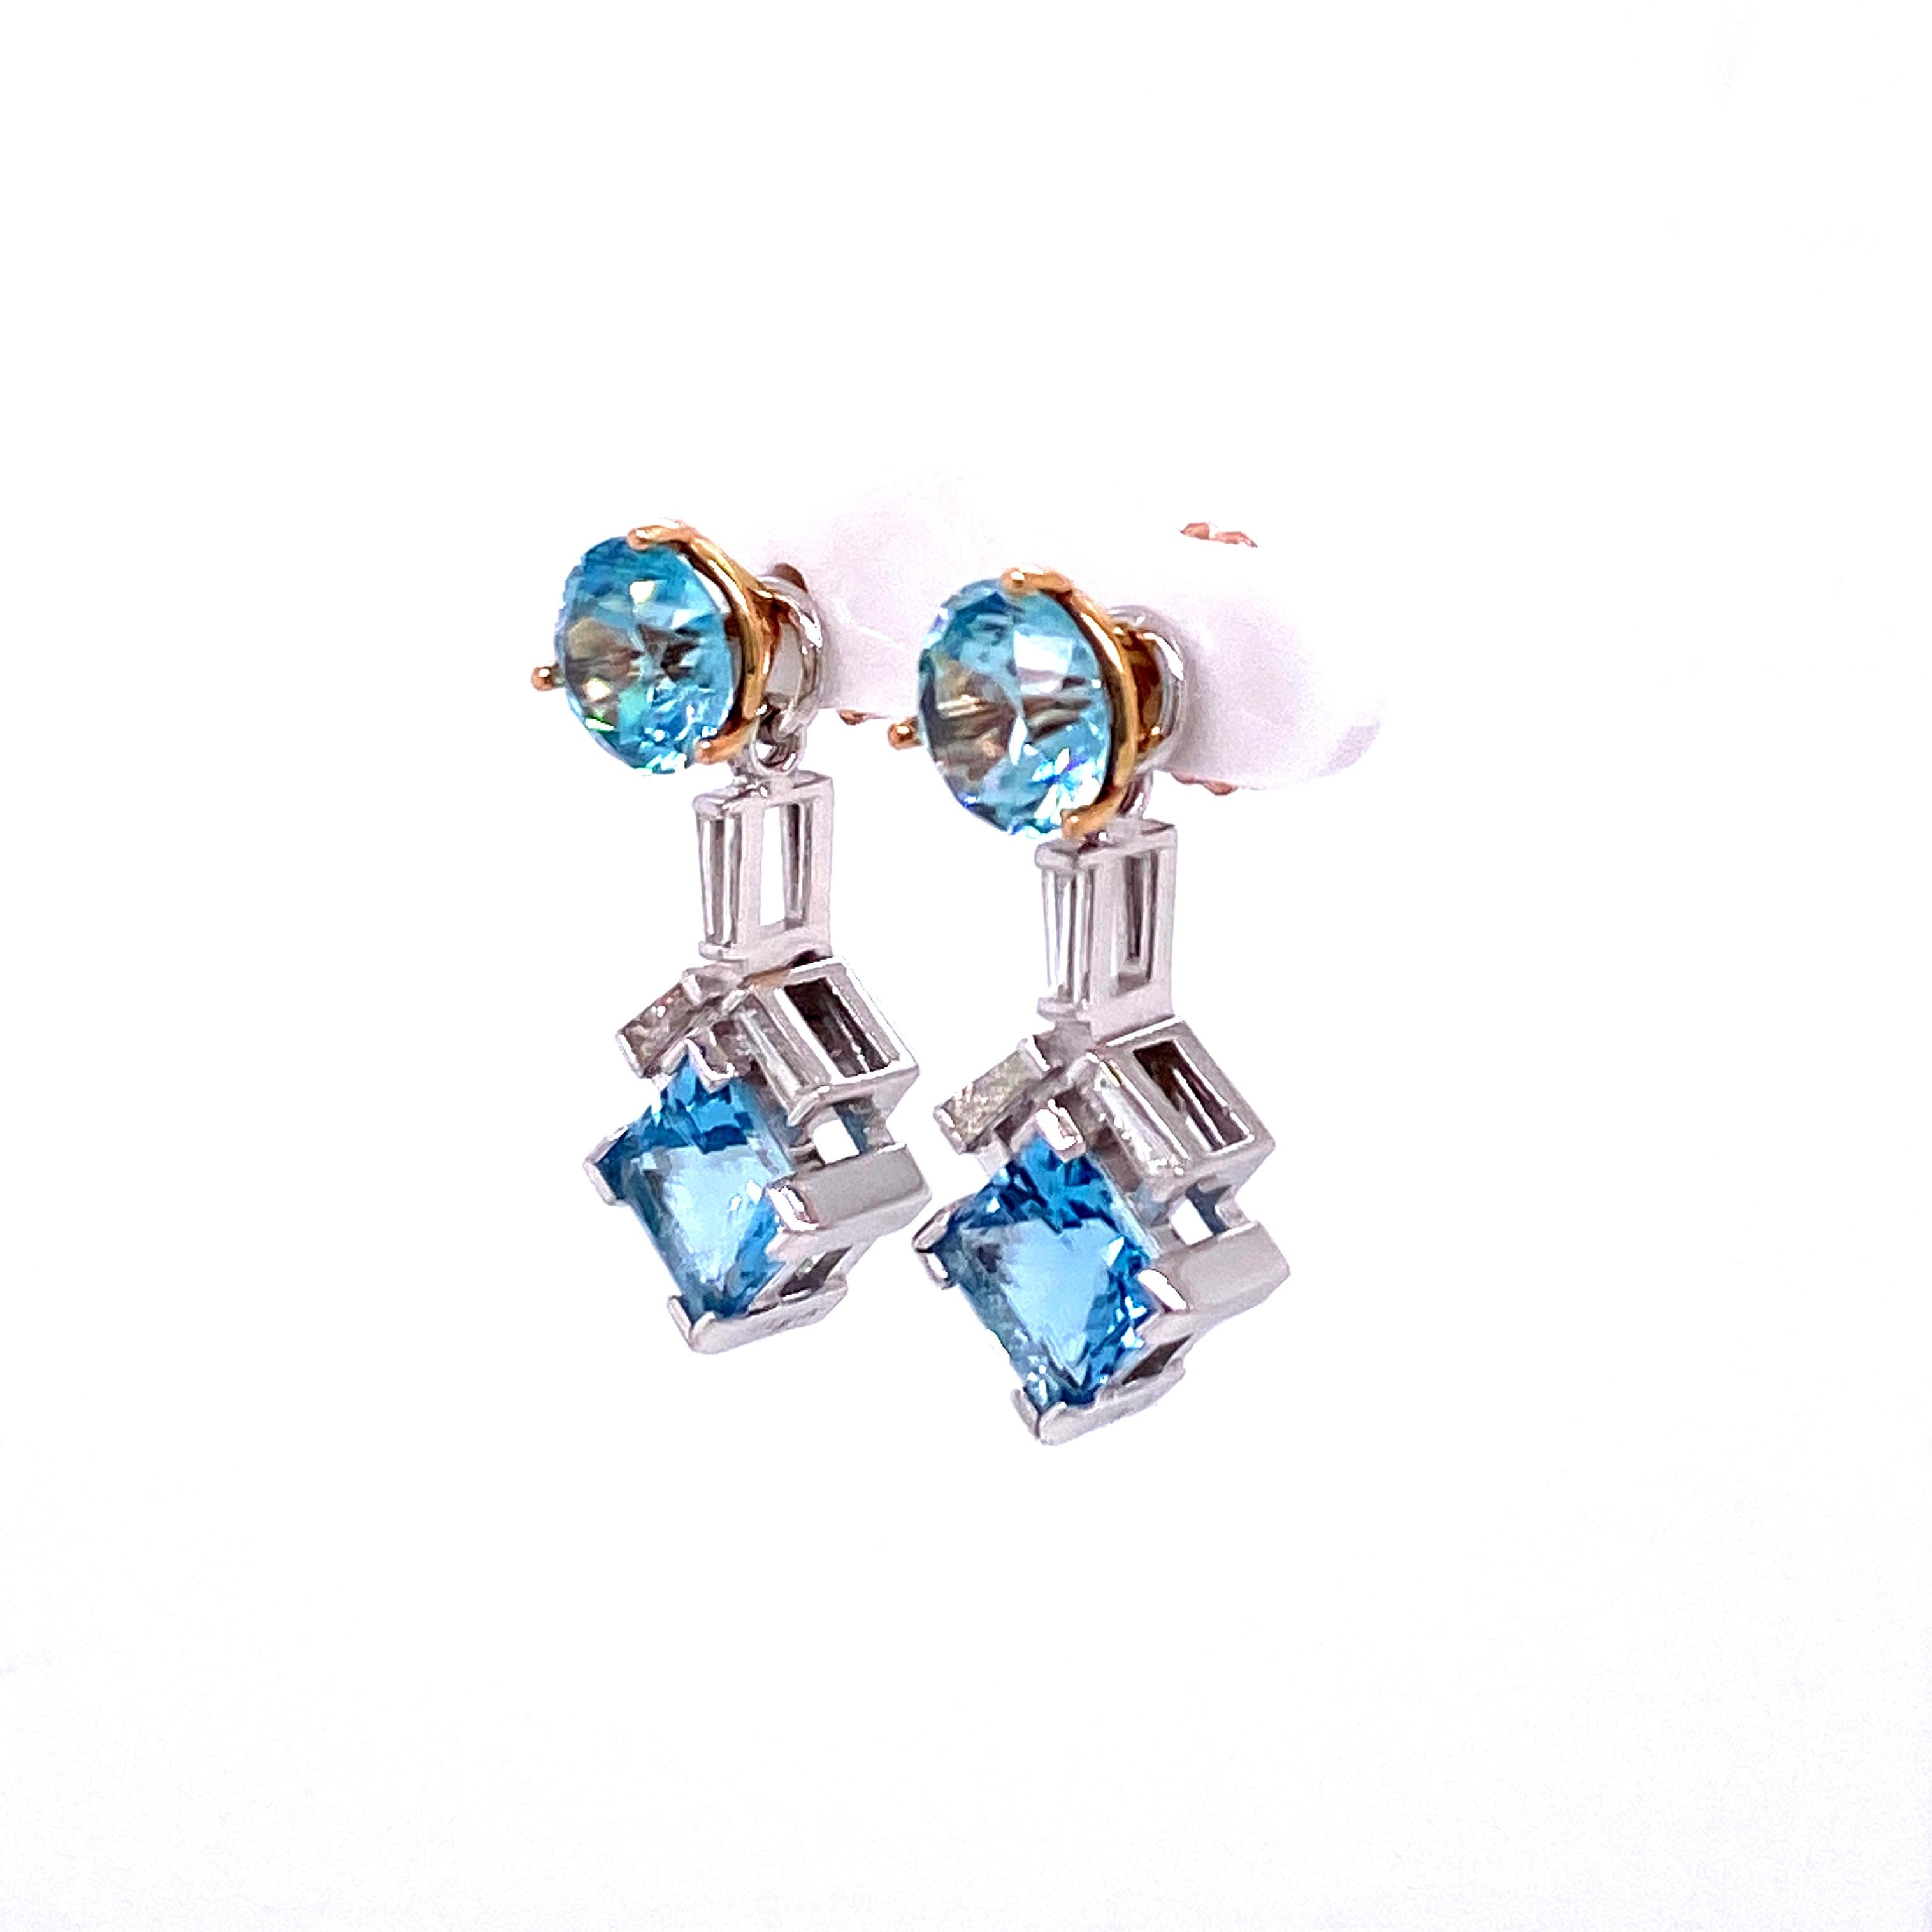  A pair of 18k rose gold martini head studs with 8.8mm old mine cut blue zircons, 7.06 carats. With a pair of 18k white gold earring jackets featuring a pair of princess cut 8mm aquamarine, 4.78 total carat weight, and accented with 0.55 total carat